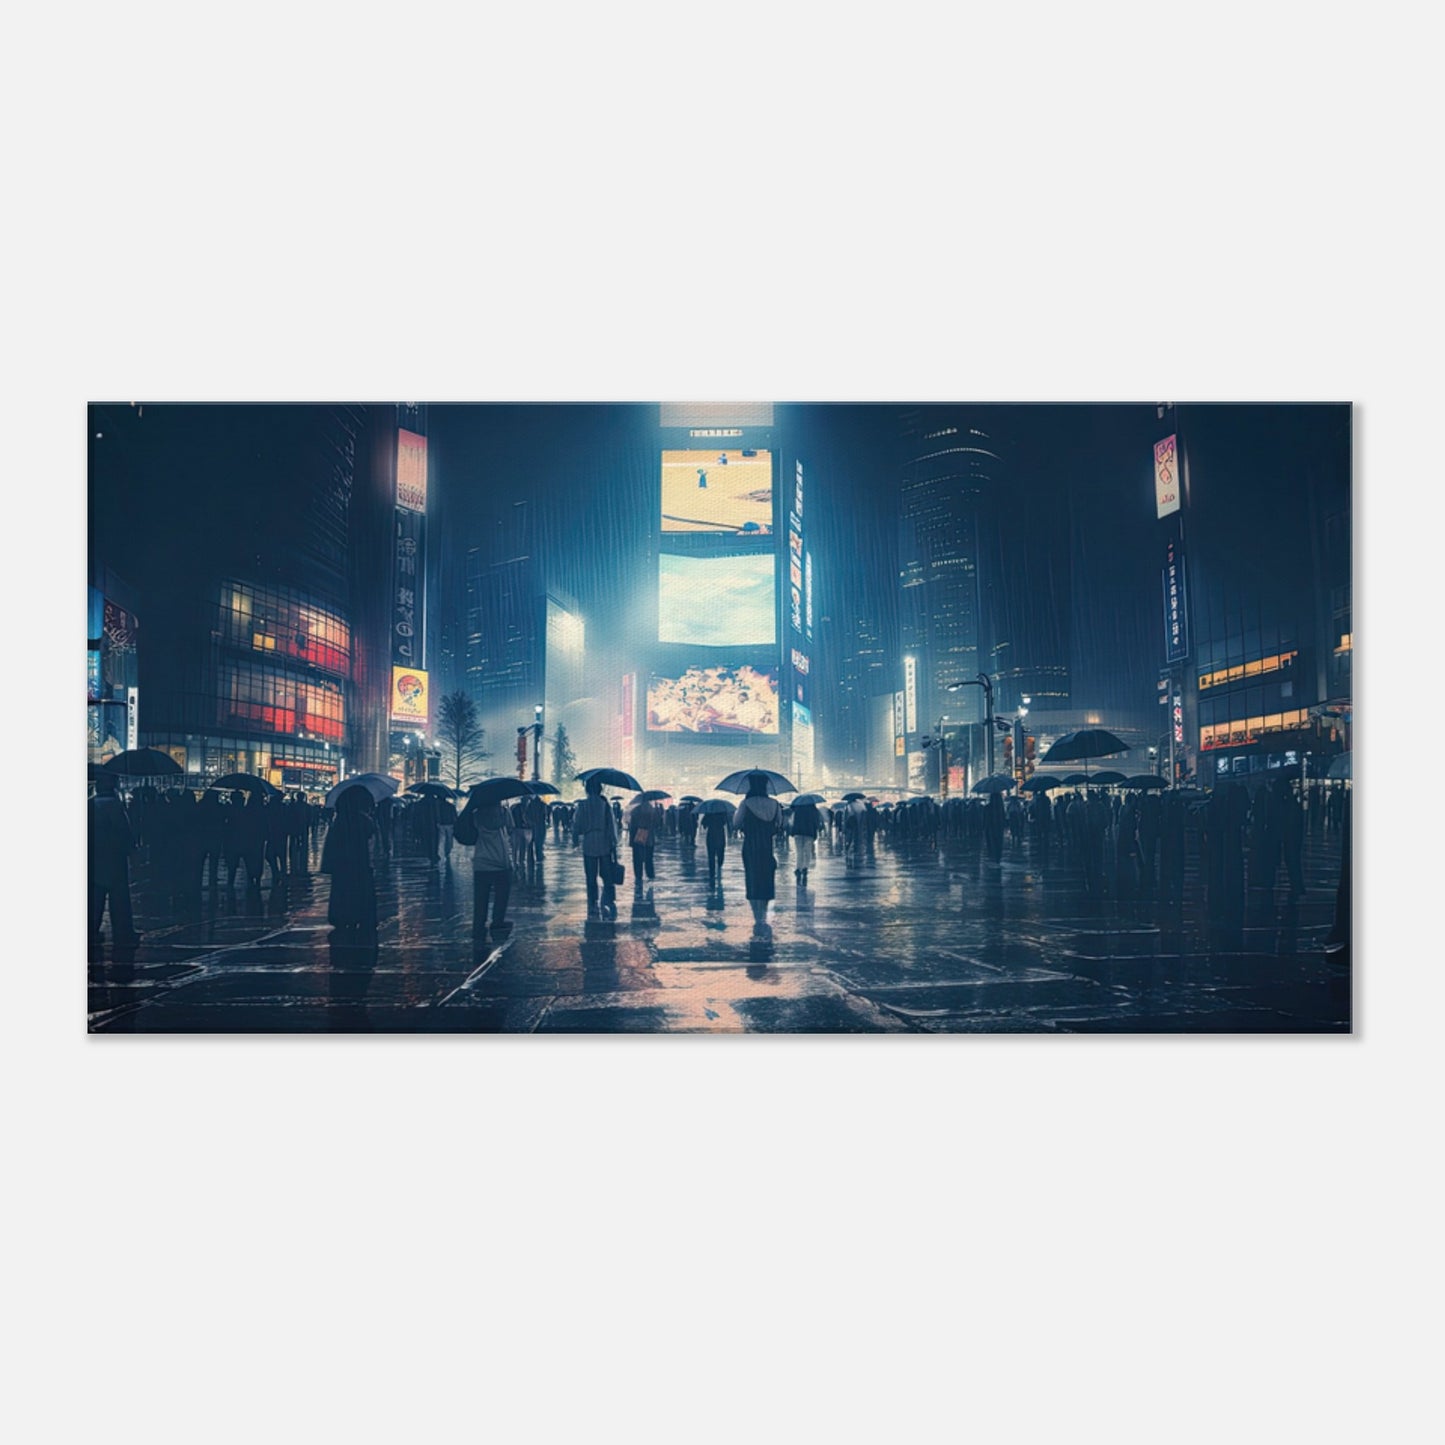 Shibuya Crossing in the Ran Artwork AllStyleArt Thick 40x80 cm / 16x32" 